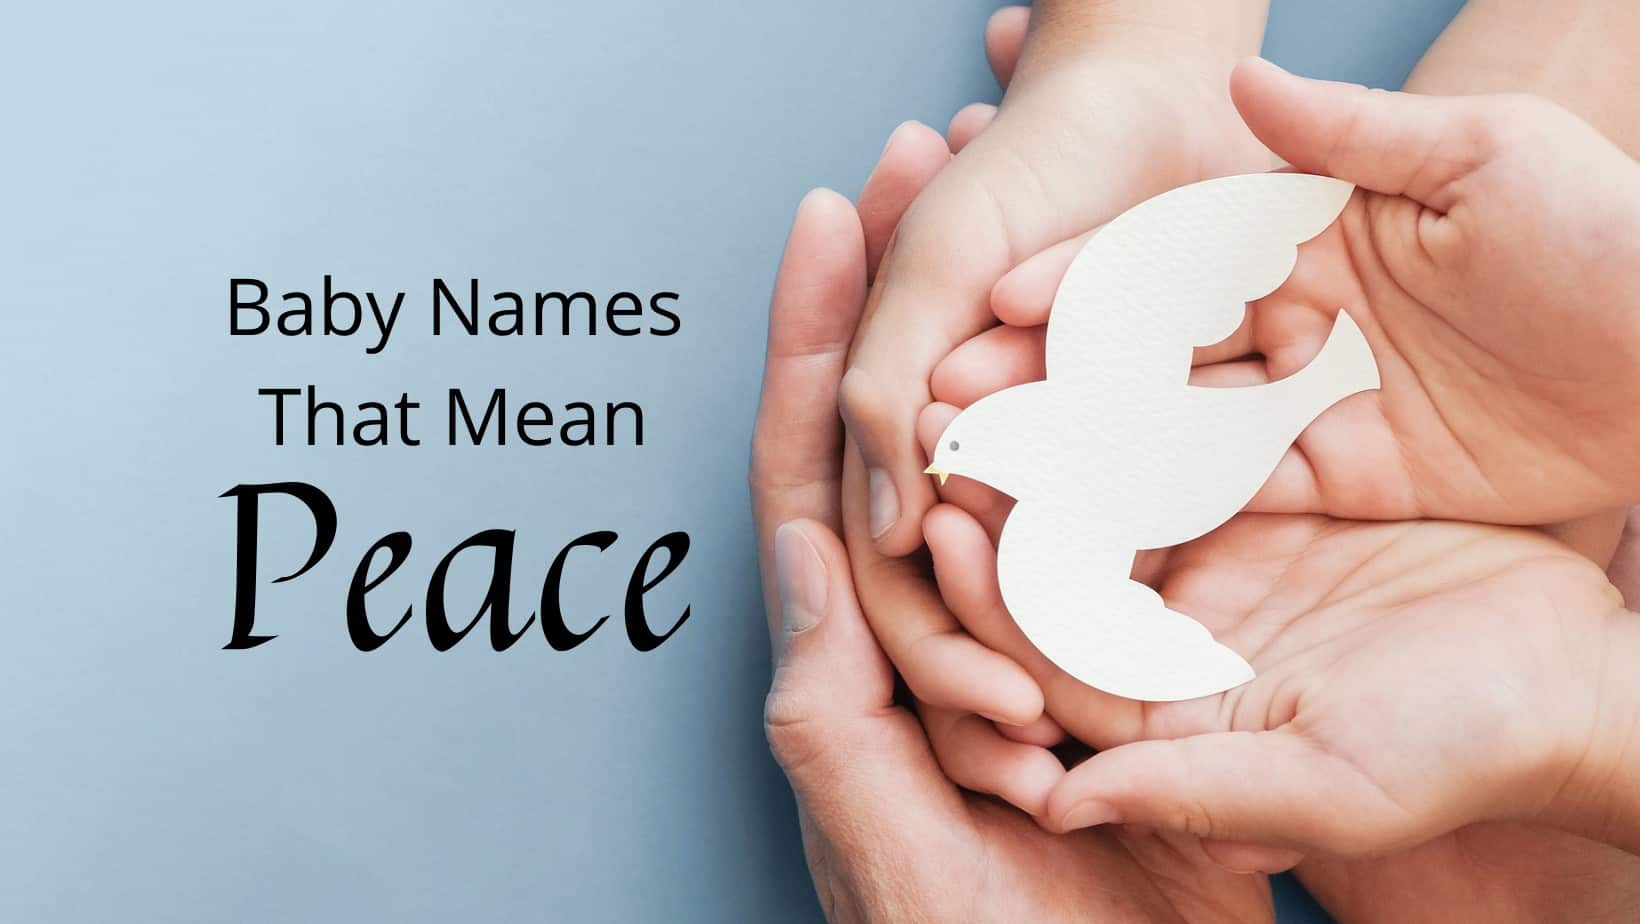 Baby Names That Mean Peace